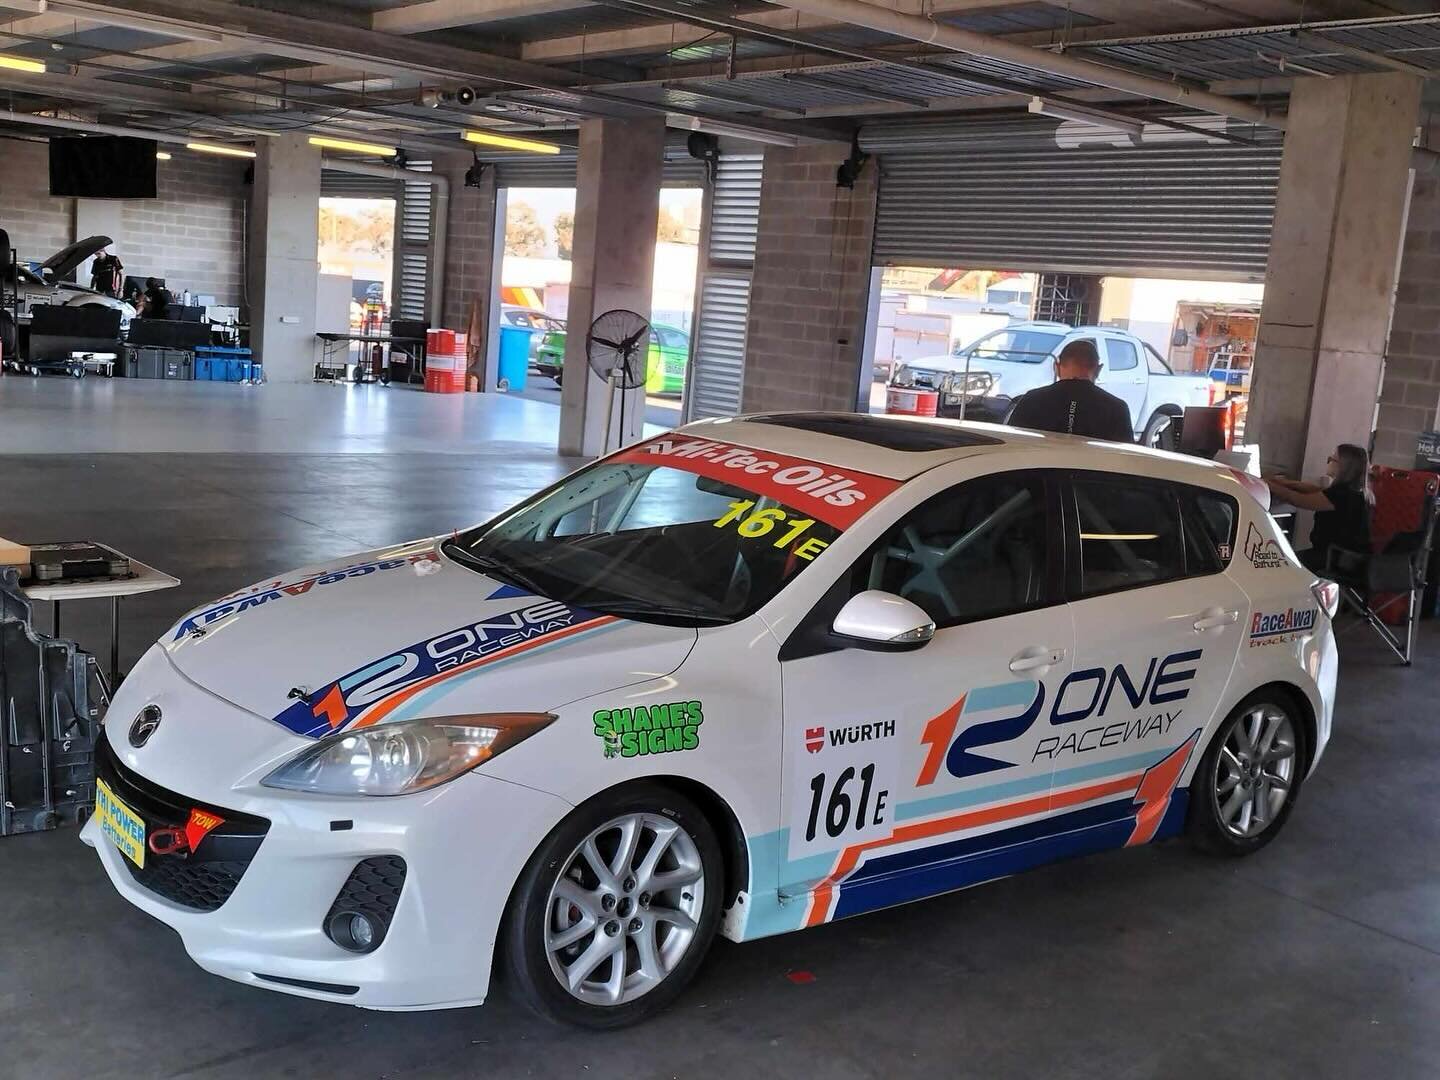 Well hello Mount Panorama 💪

Bathurst Day 1: Team and cars have arrived safely. Set up our garage and most importantly the food area for the team. Our new build got some lovely pyjamas thanks to @shanes_signs. We are stoked to be repping @oneraceway